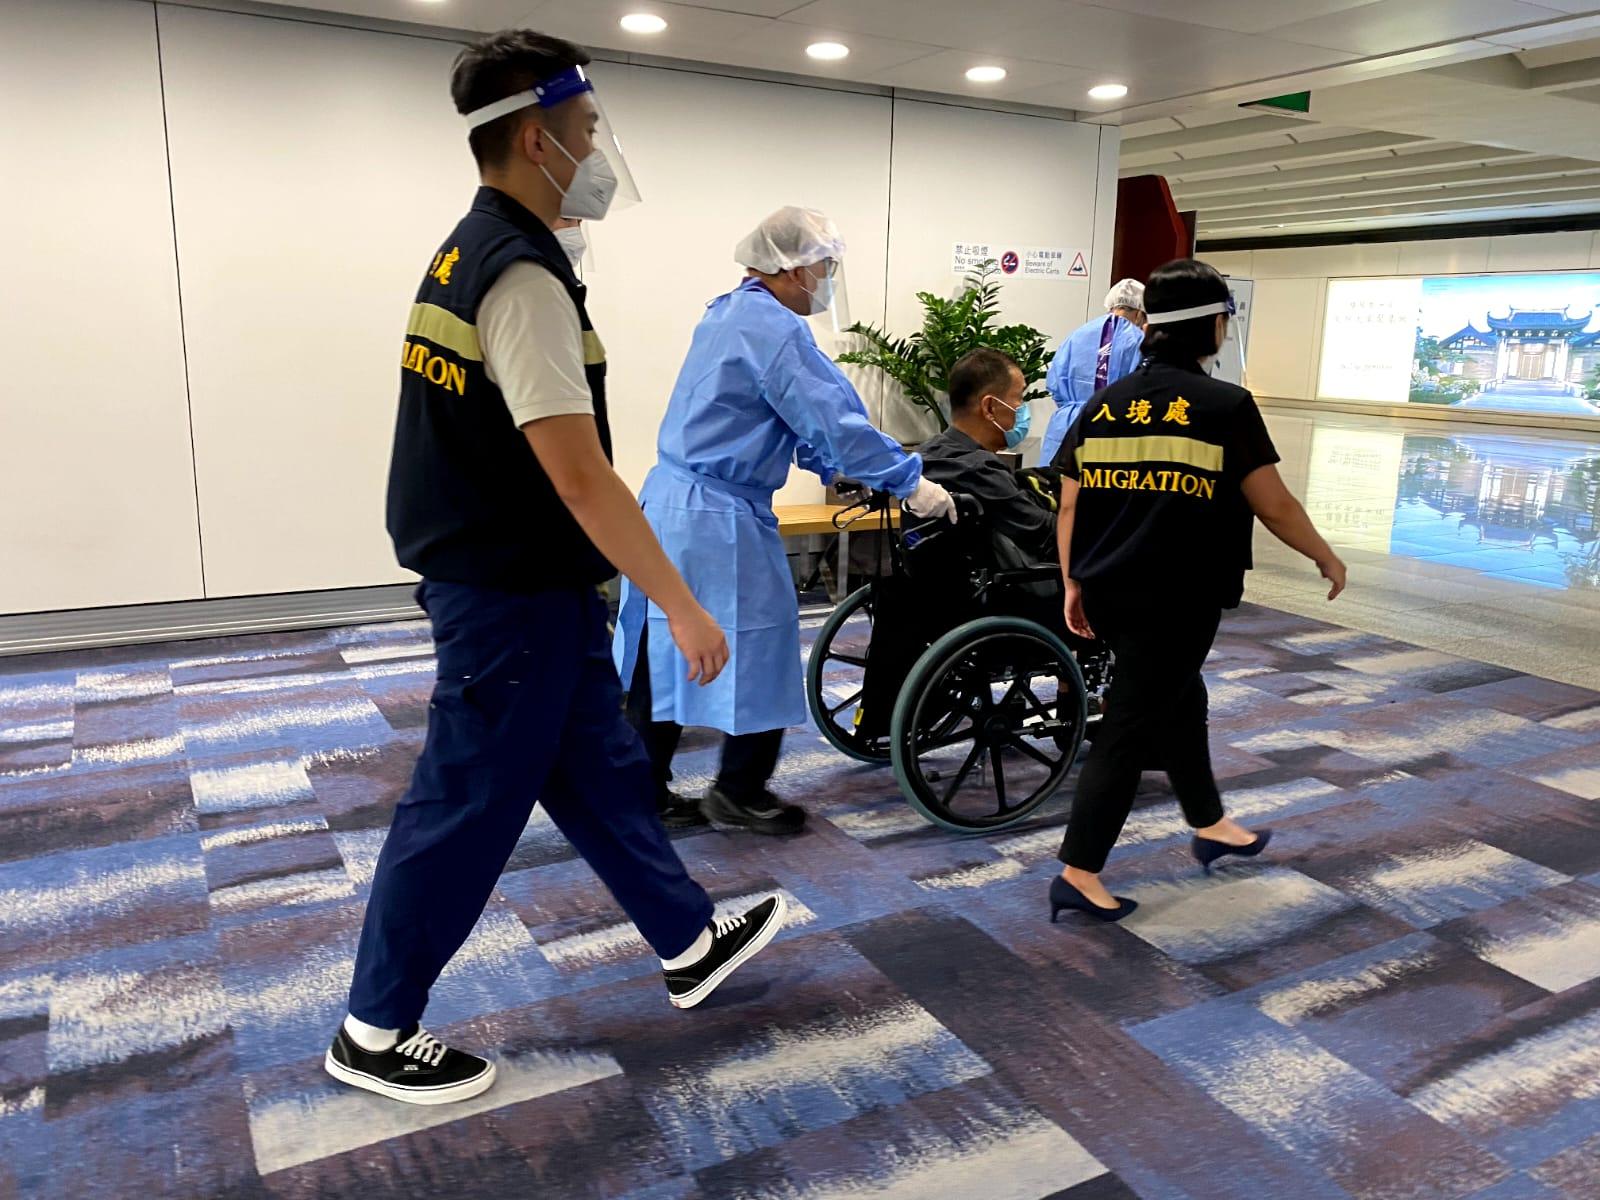 An assistance seeker safely arrived at Hong Kong International Airport today (August 22). Photo shows Immigration staff providing assistance on site.